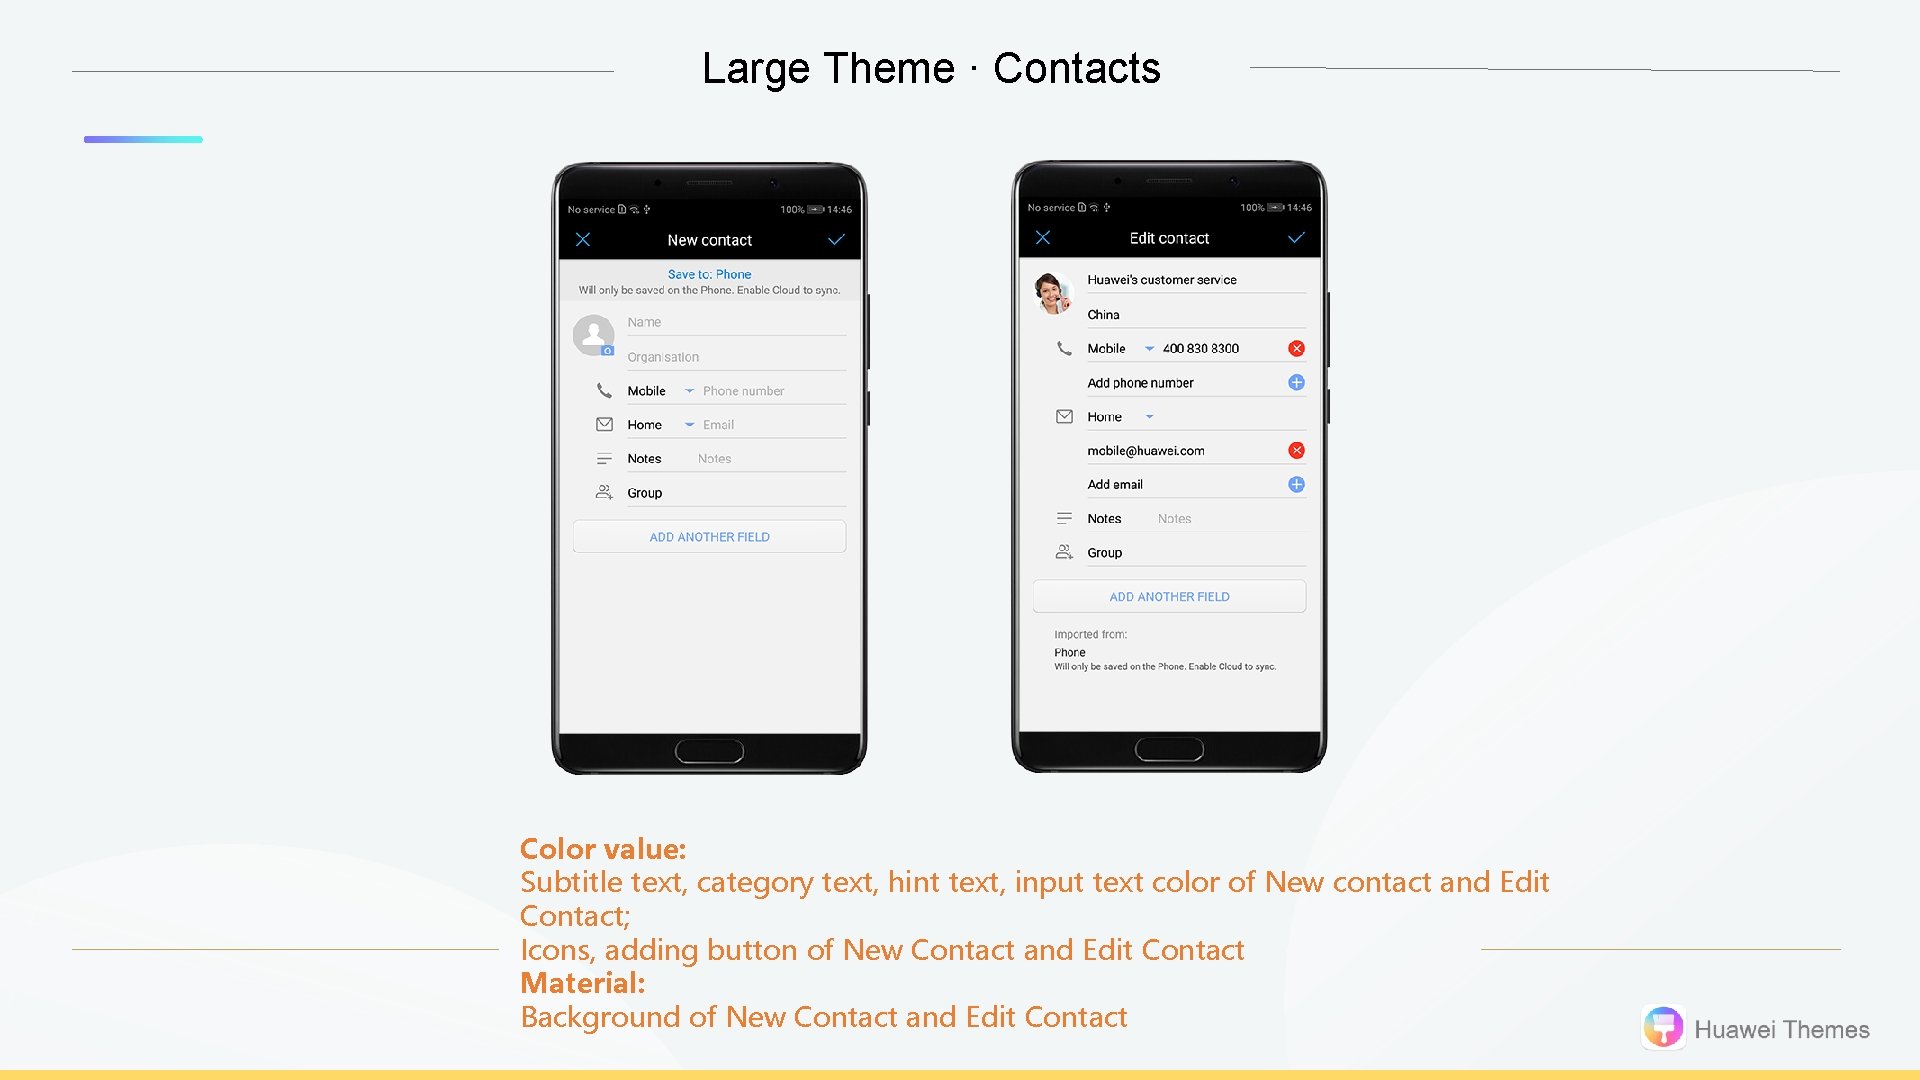 Large Theme · Contacts Color value: Subtitle text, category text, hint text, input text